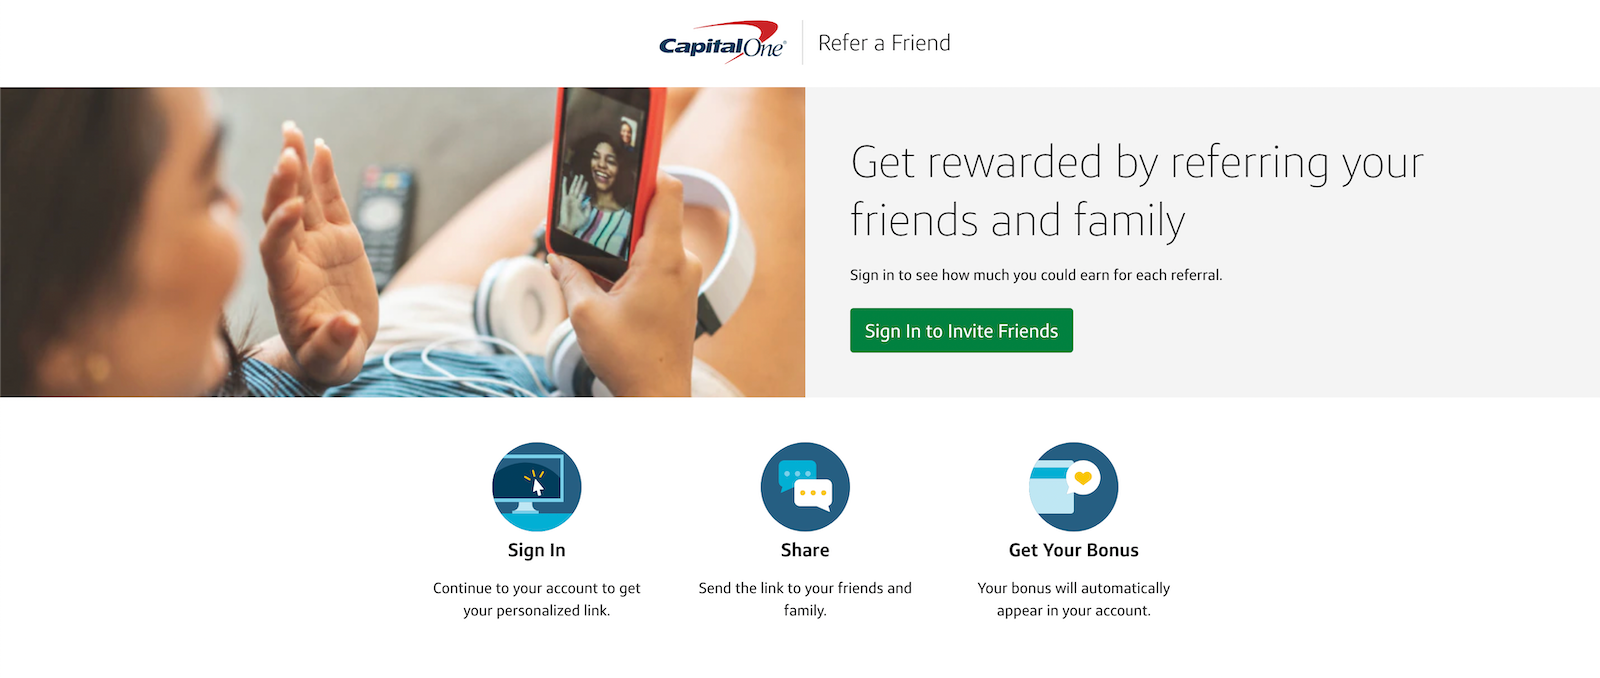 home page for the Capital One Refer a Friend program